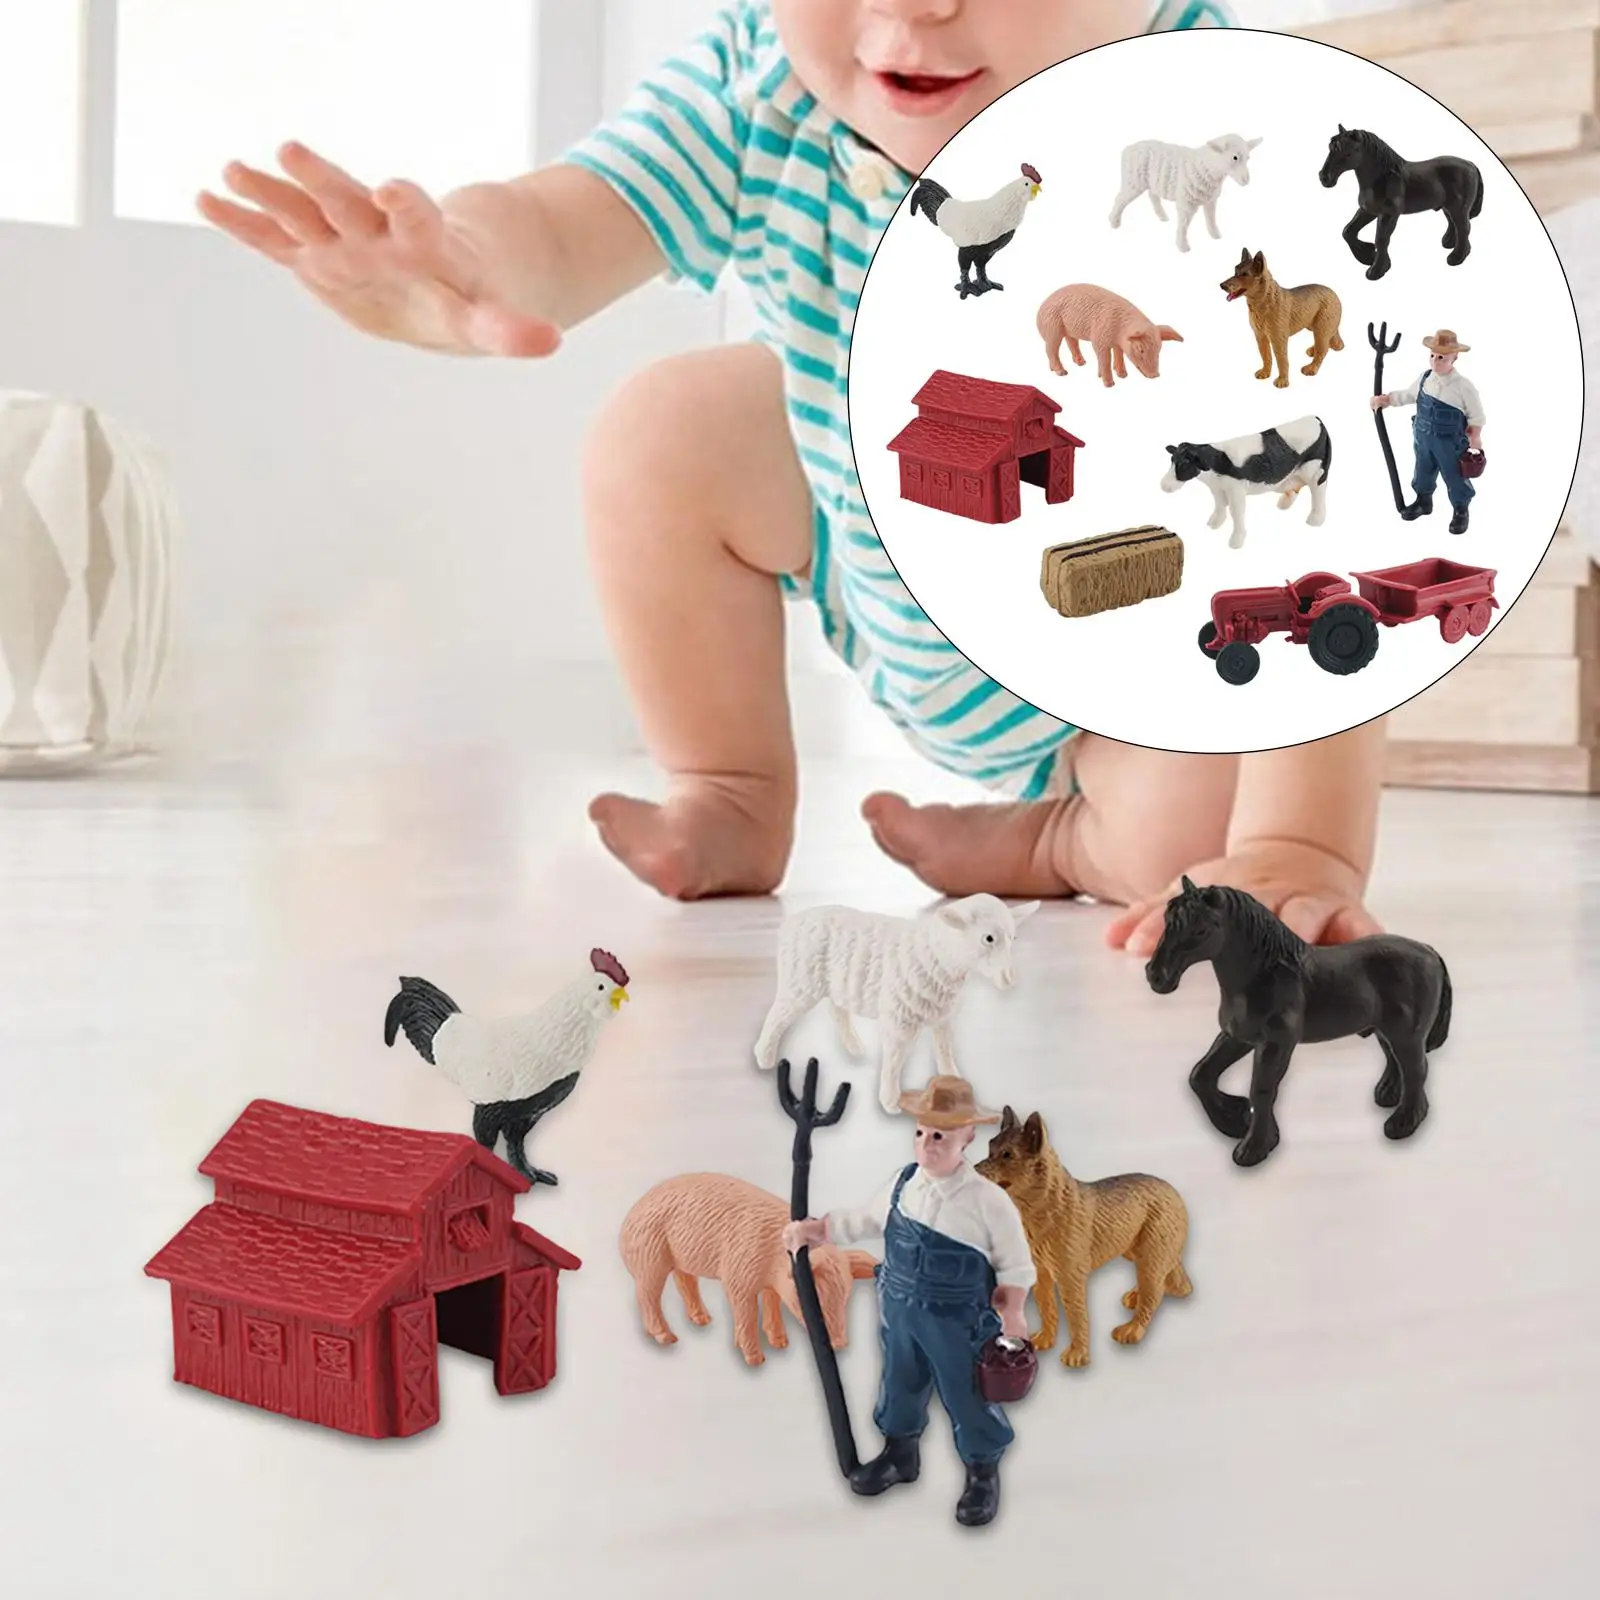 Lifelike Farm Animals Toys Farm Figurines Playset Small Poultry Toy Learning Educational Toys for Children Toddlers Boys Girls